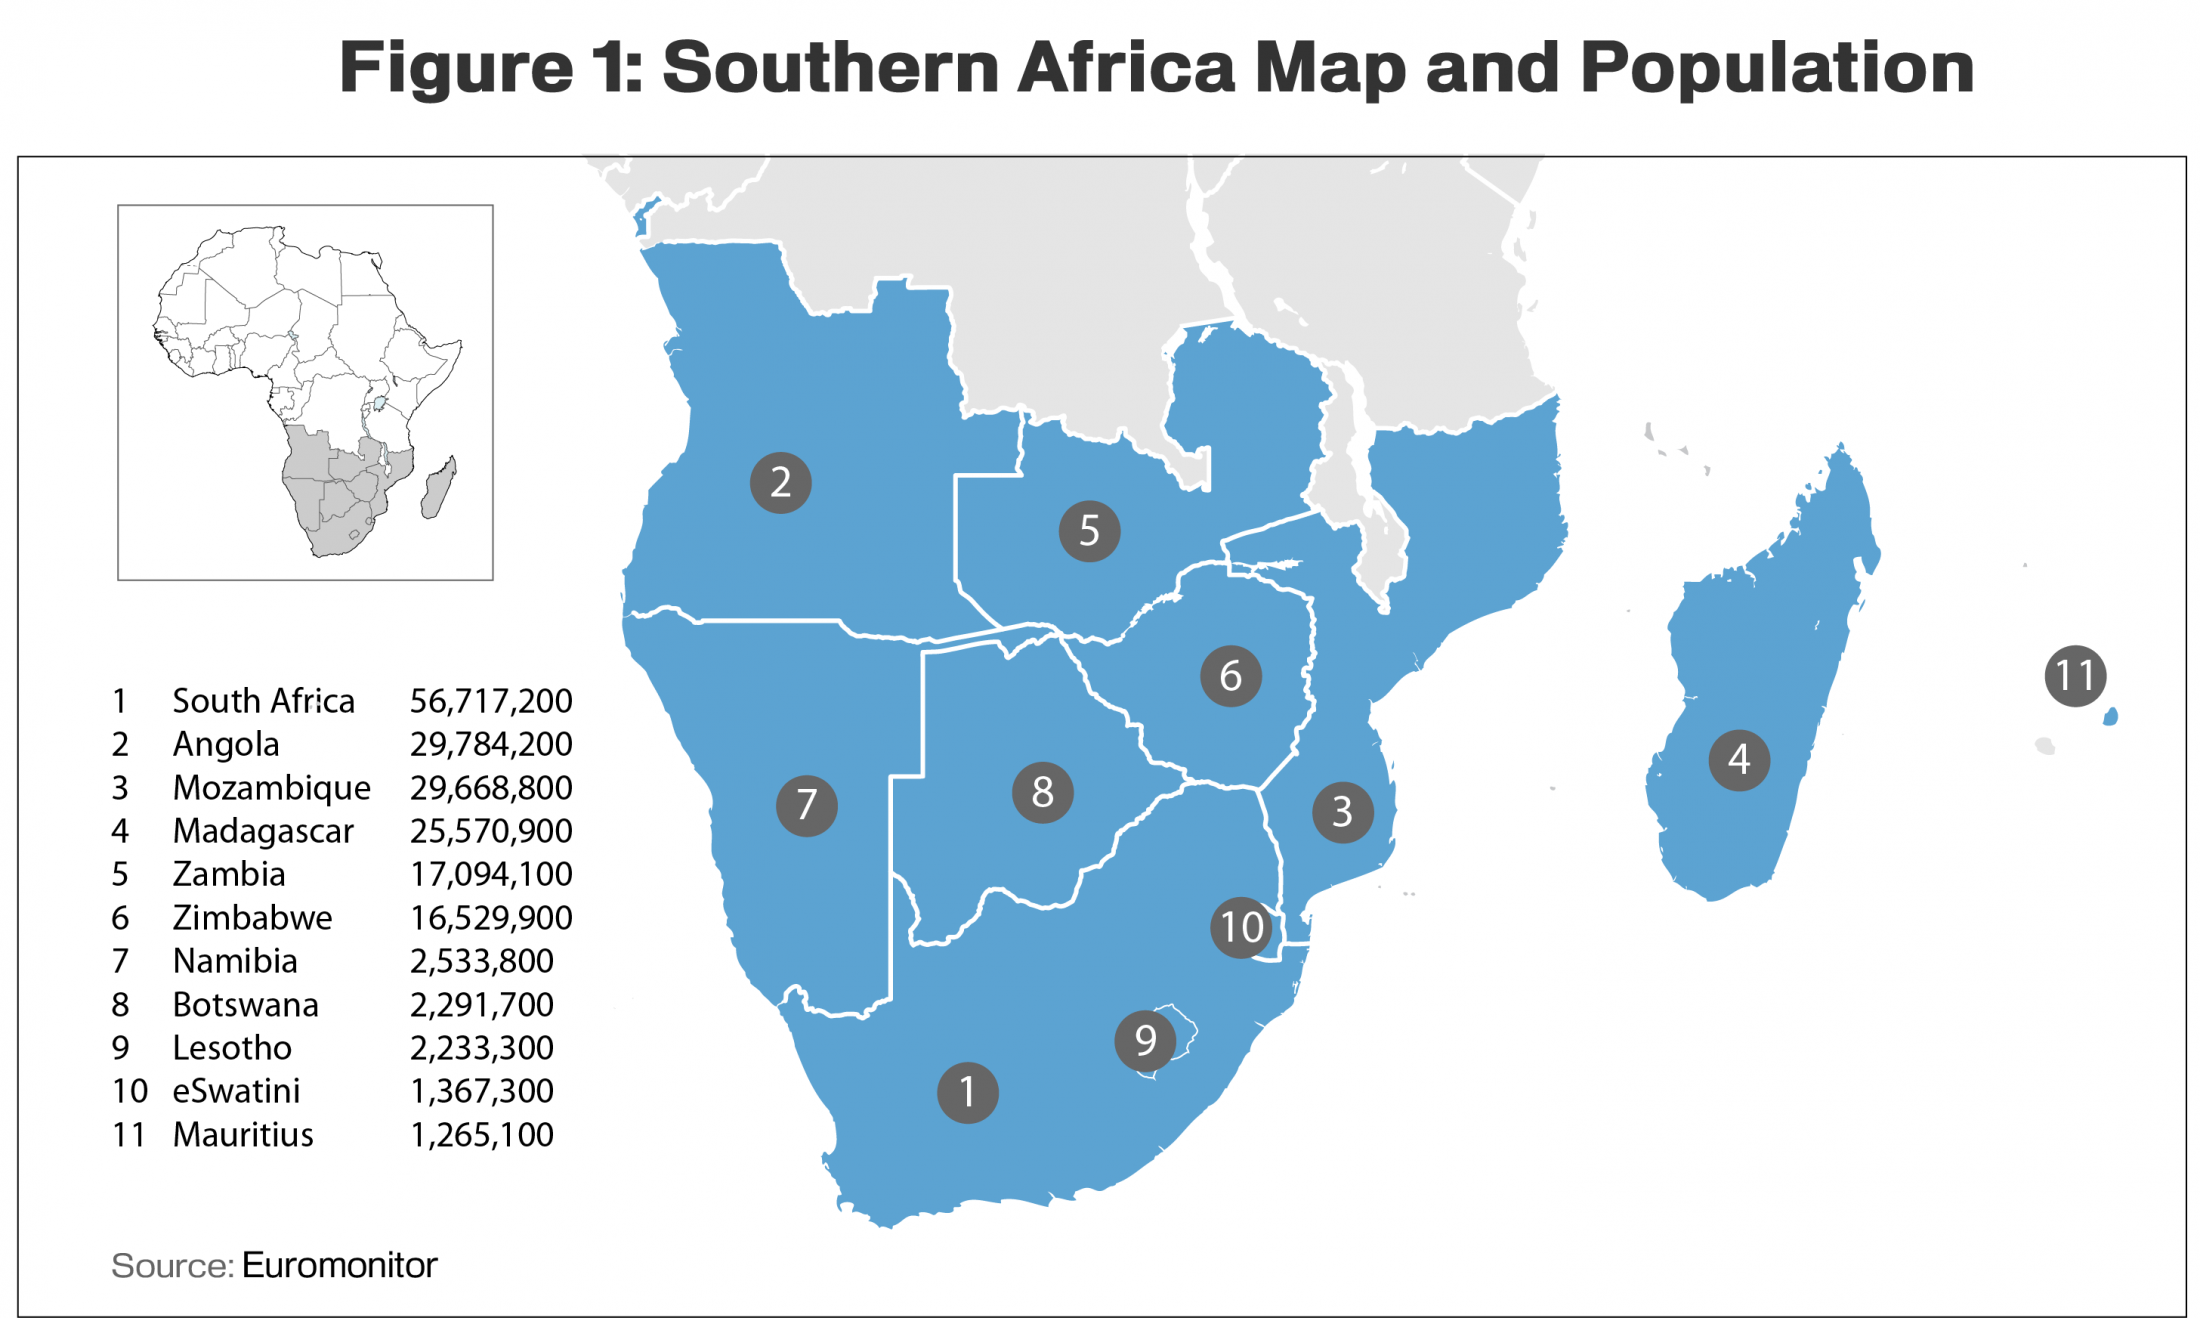 Map showing the Southern Africa region and listing the population of each nation. South Africa has the largest population with nearly 57,000,000 people